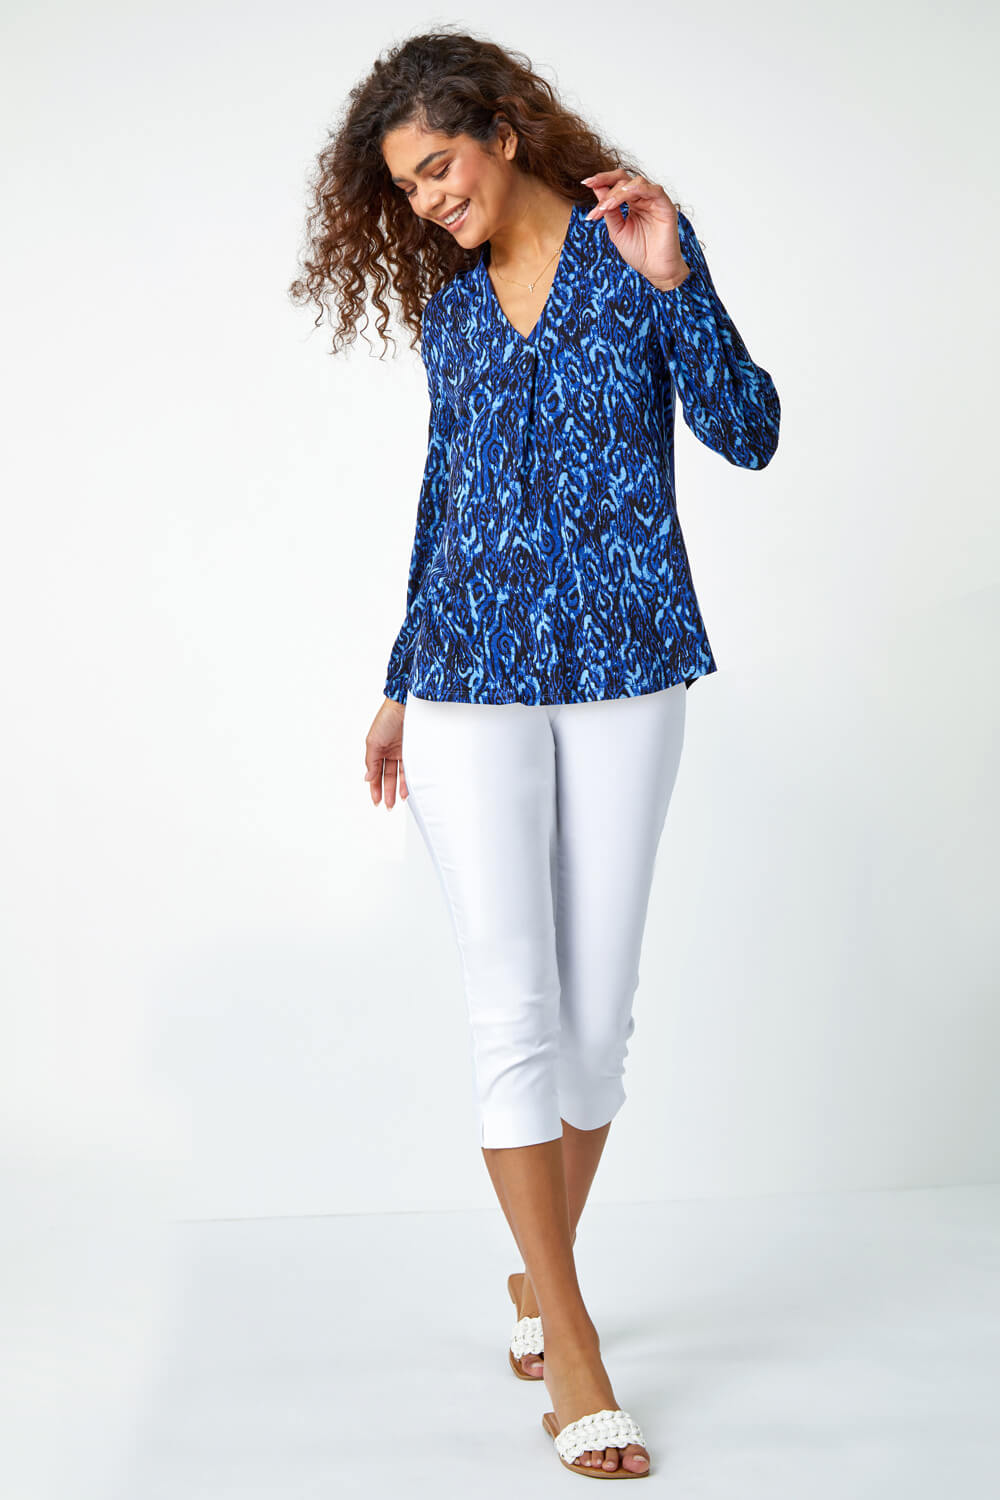 Blue Aztec Print Pleated Stretch Top, Image 2 of 5